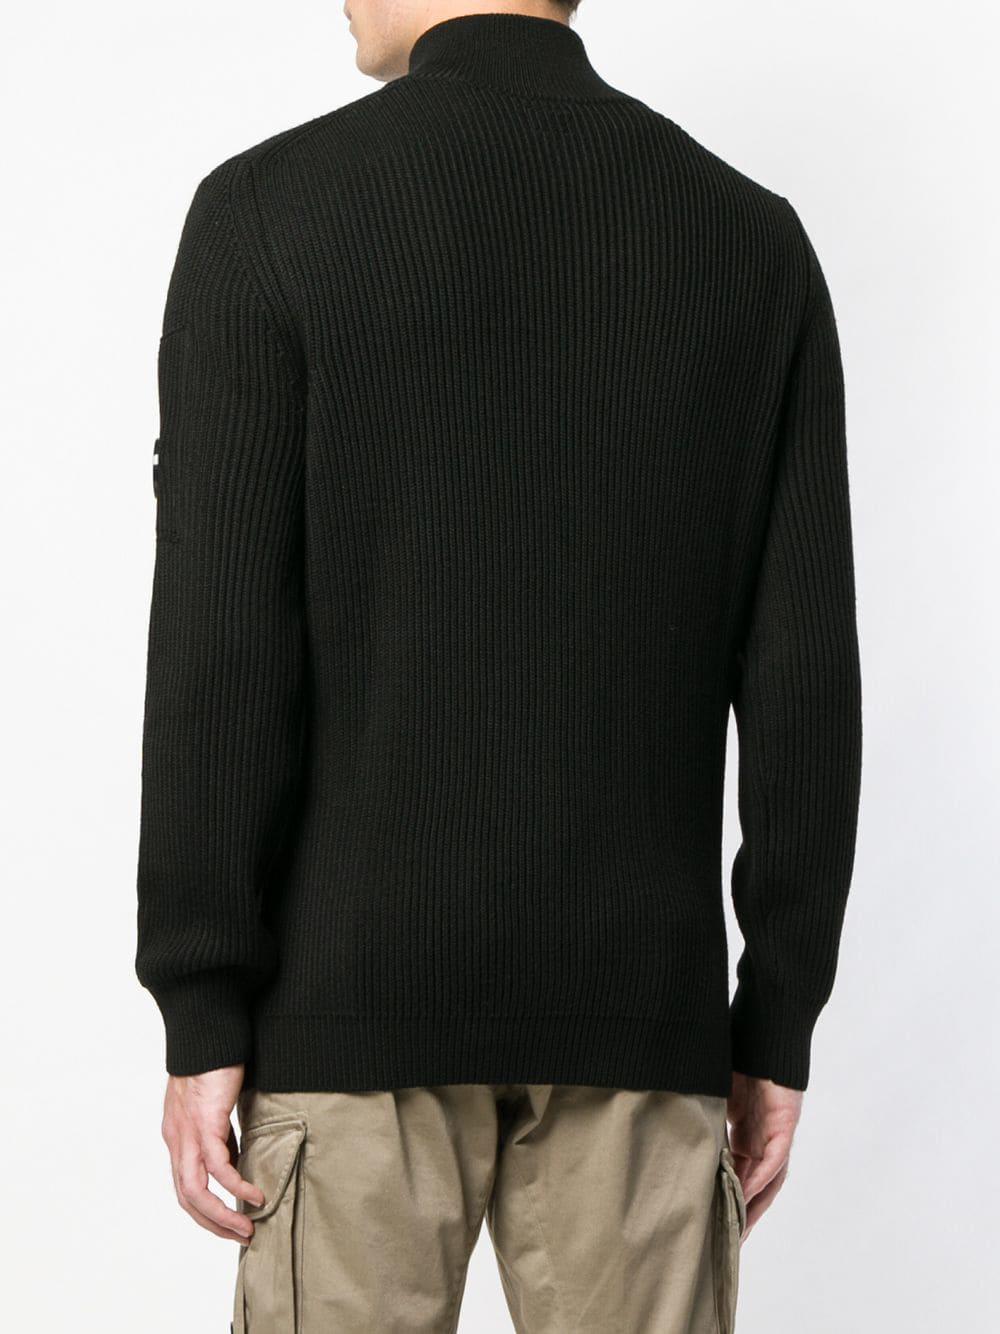 C P Company Wool Zipped Ribbed Jumper in Black for Men - Lyst